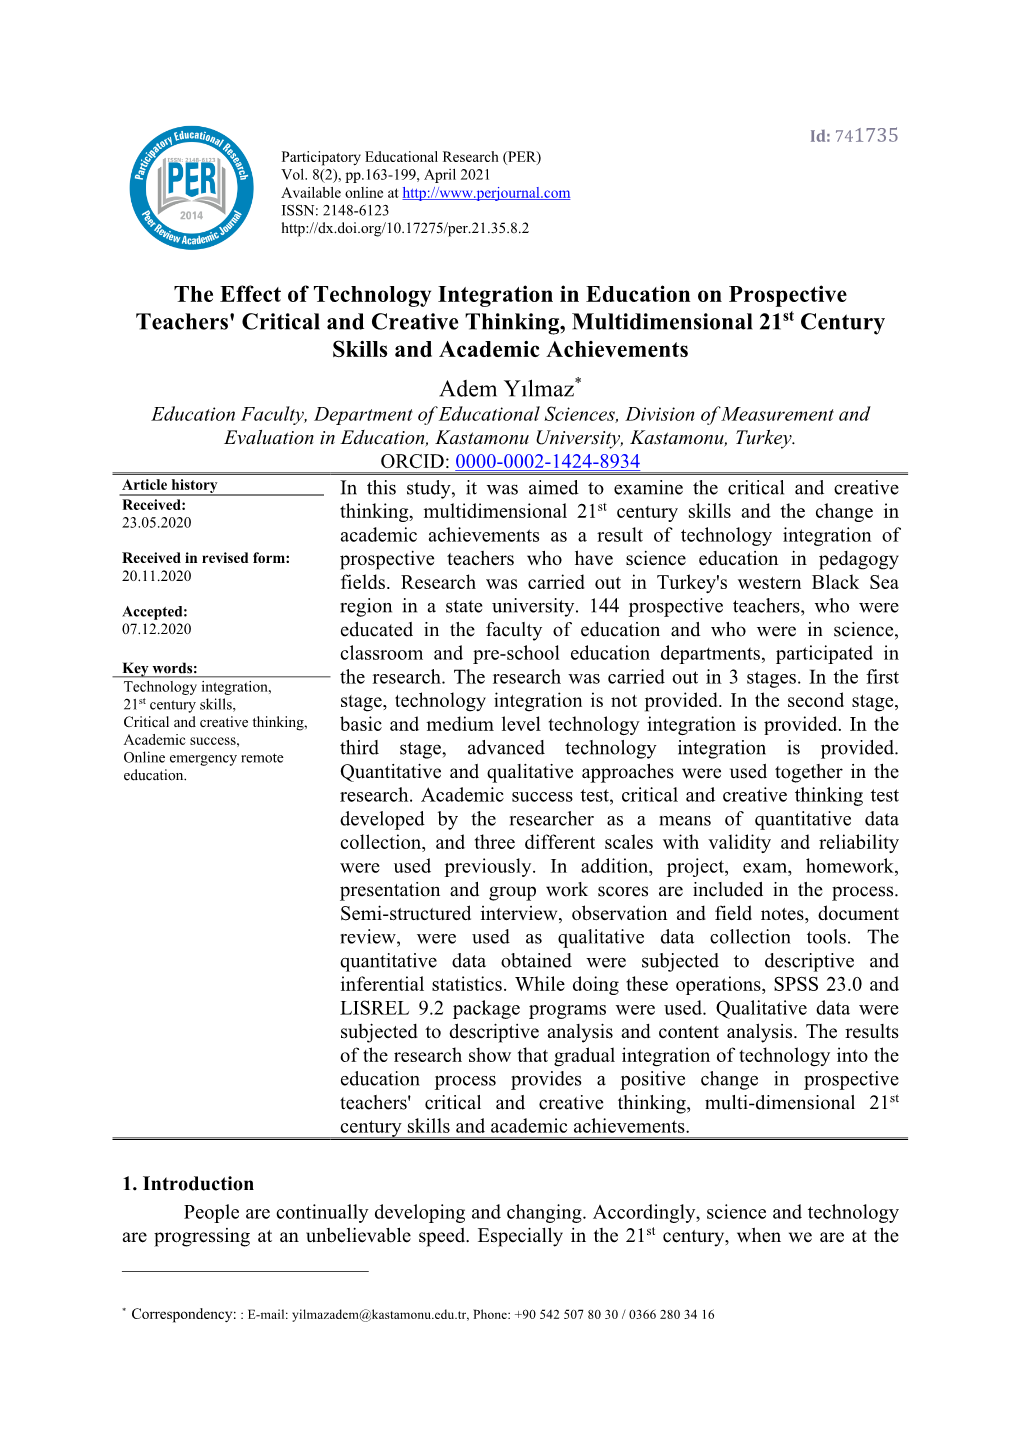 The Effect of Technology Integration in Education on Prospective Teachers' Critical and Creative Thinking, Multidimensional 21St